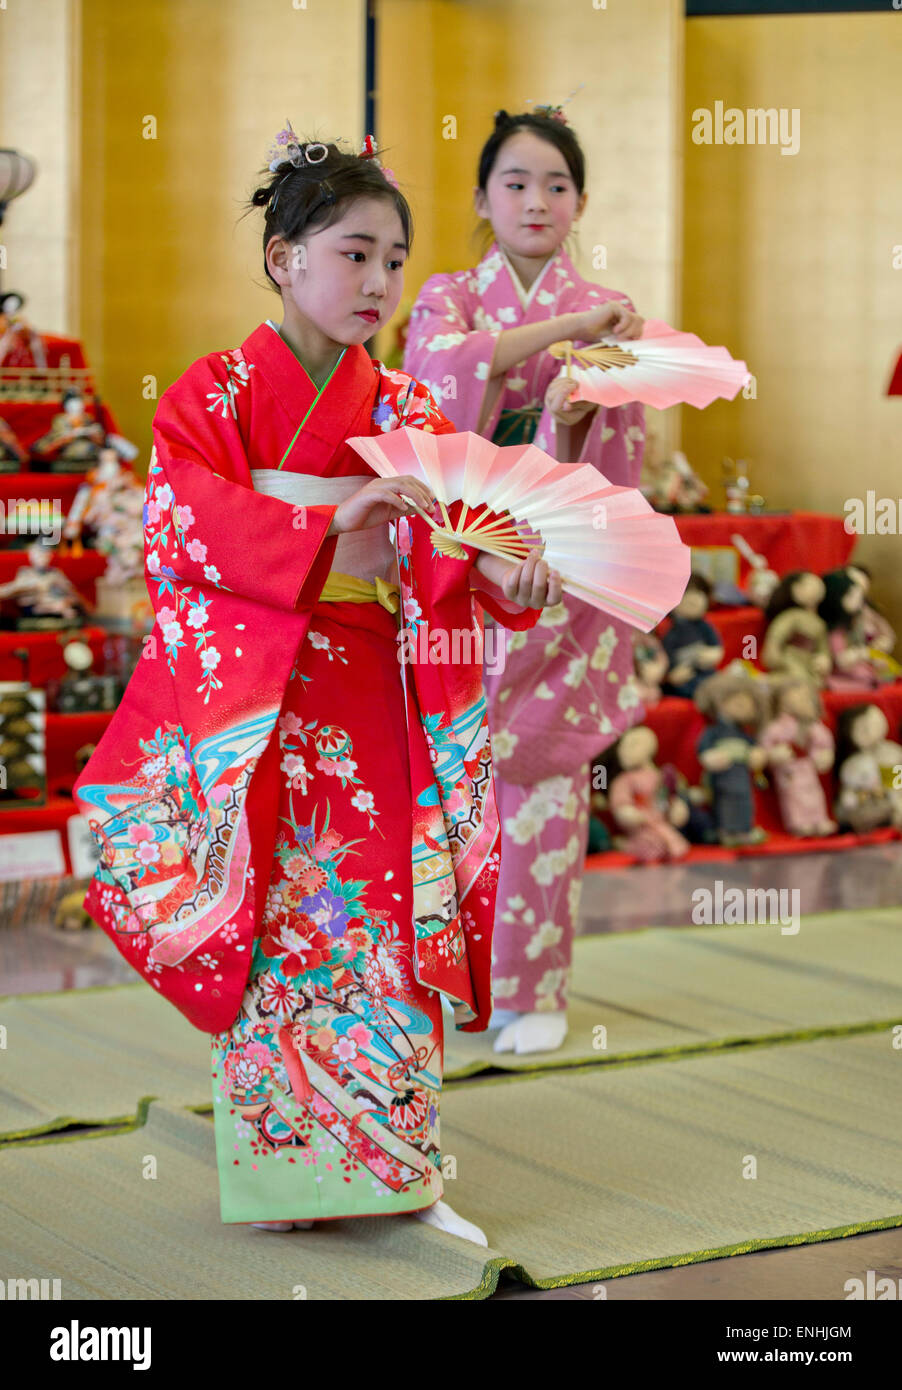 Young Japanese girls dressed in traditional kimono during the Hinamatsuri  or Hina Doll Festival at the Shinnanyo Fureai Center March 7, 2015 in  Shunan City, Japan. The festival is a day in